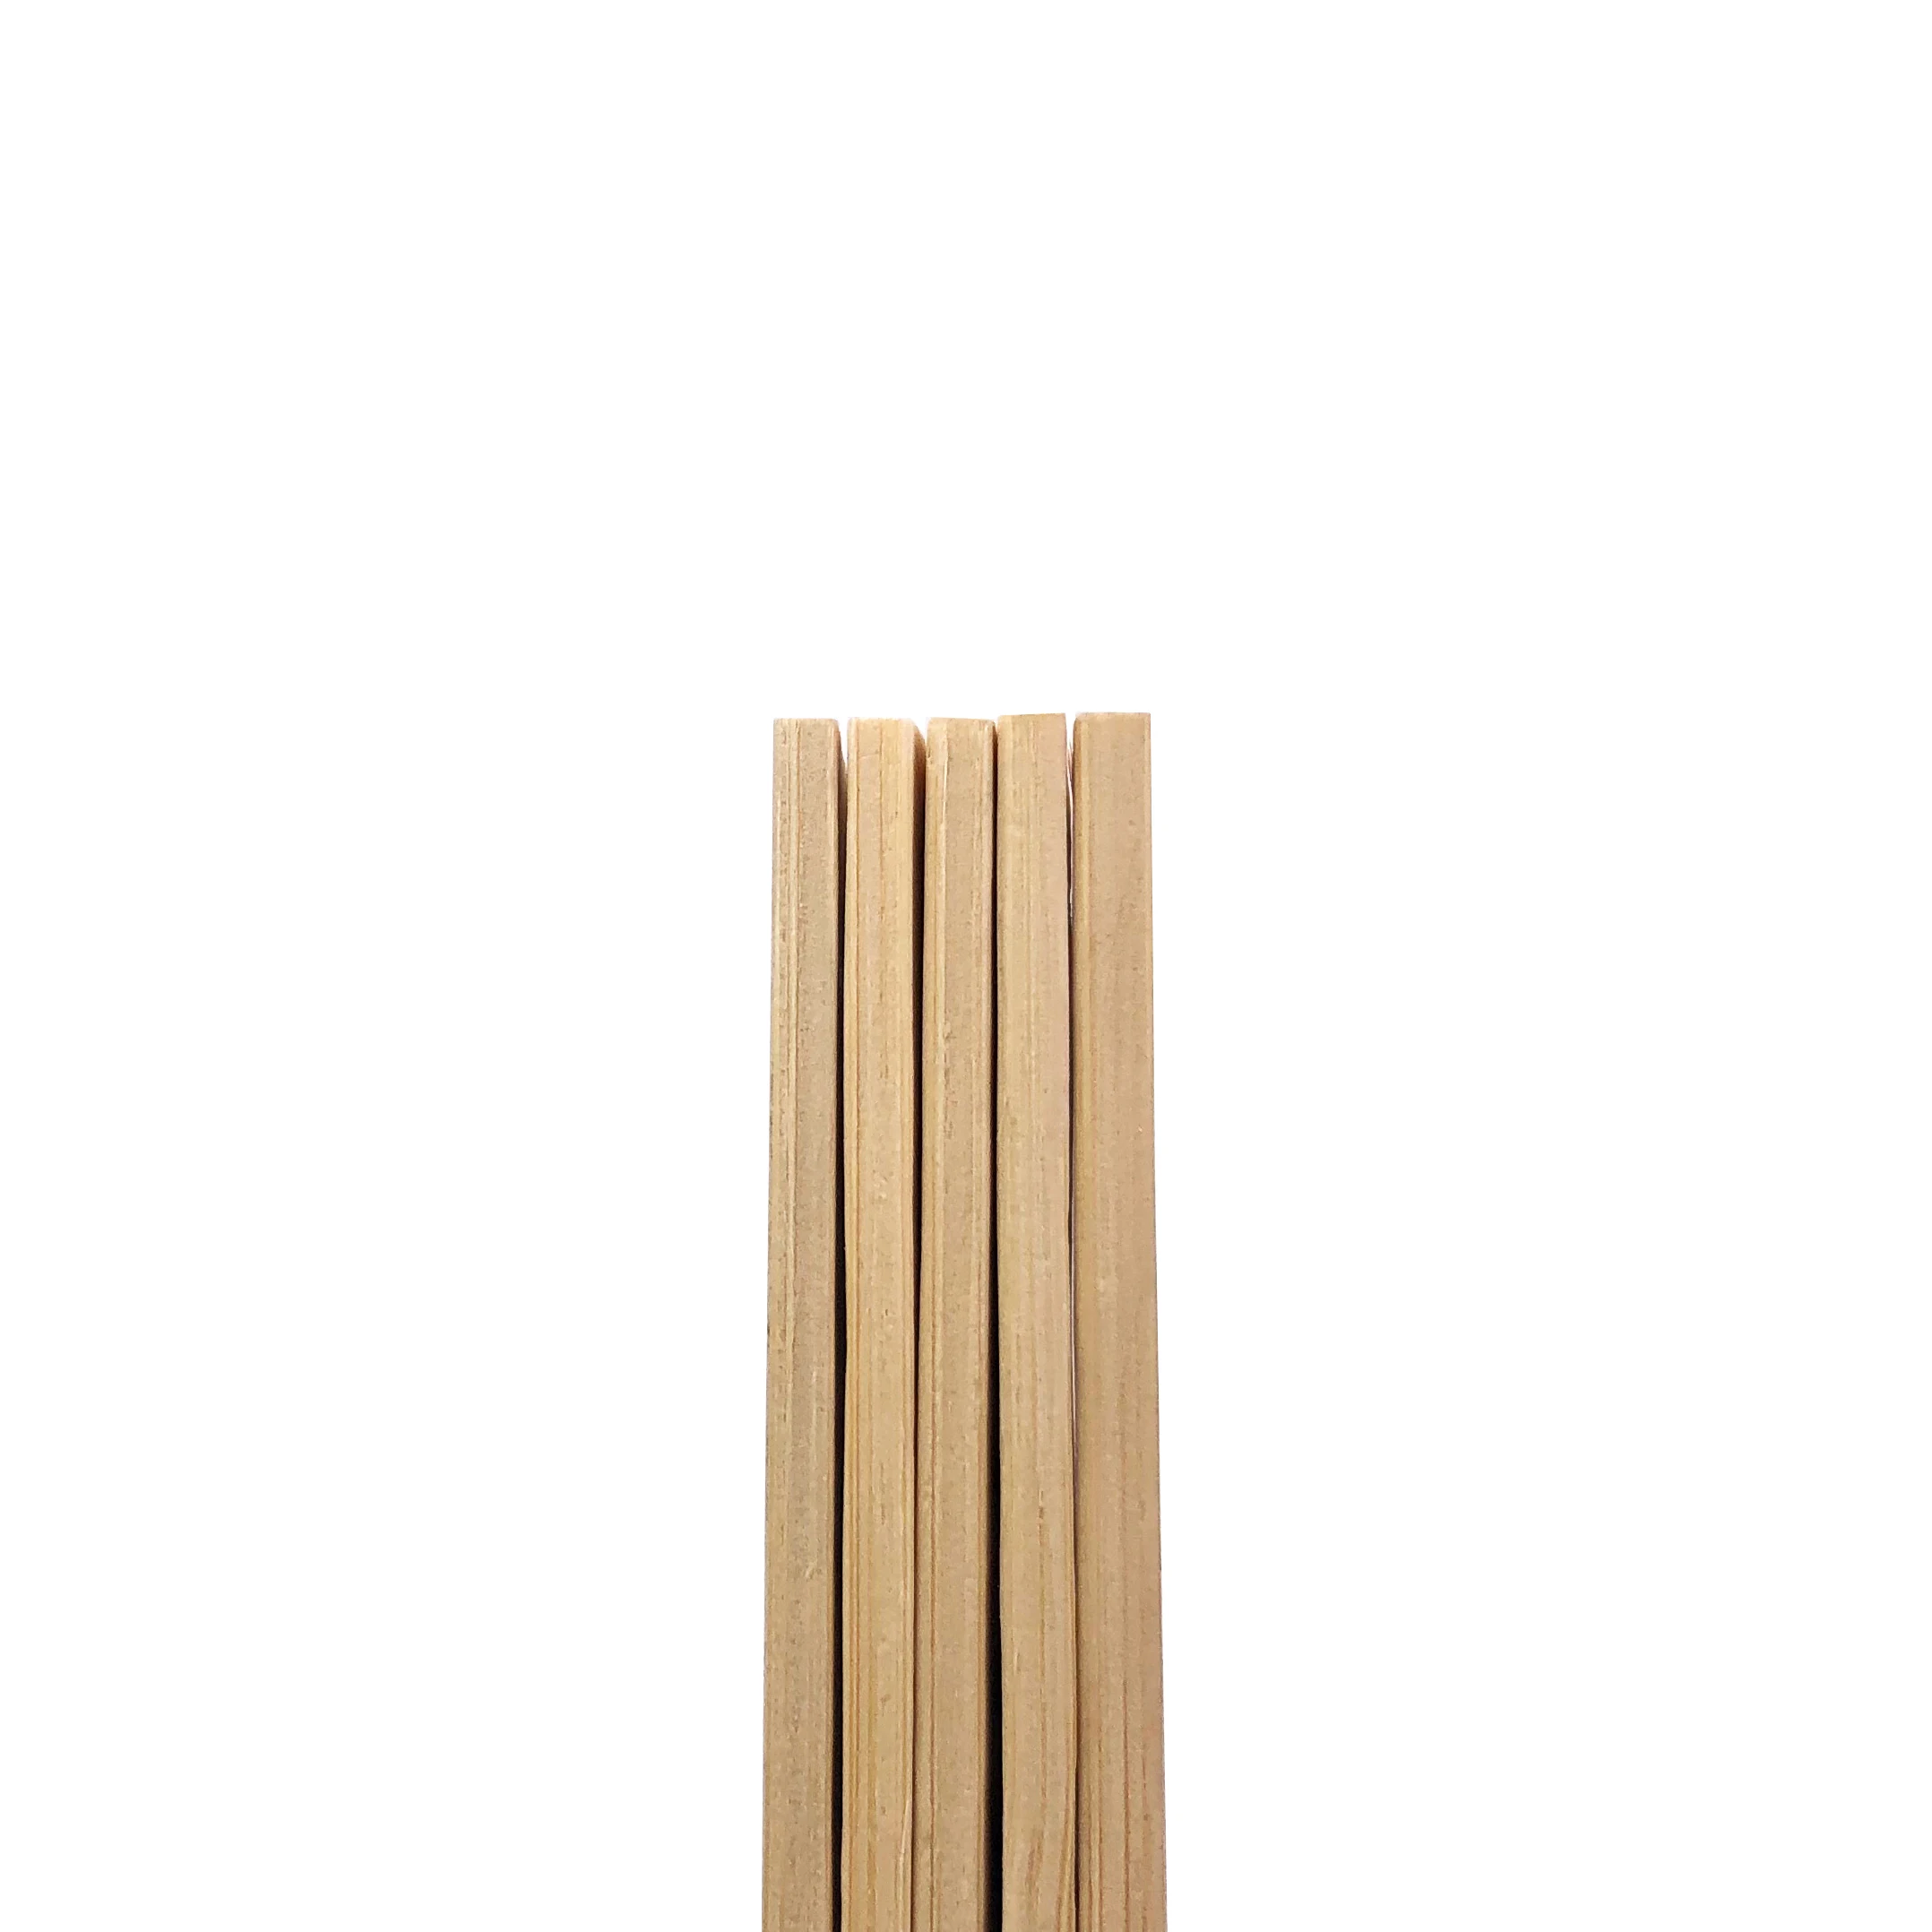 12 Inch Bamboo Paint Stir Sticks for Mixing Paint